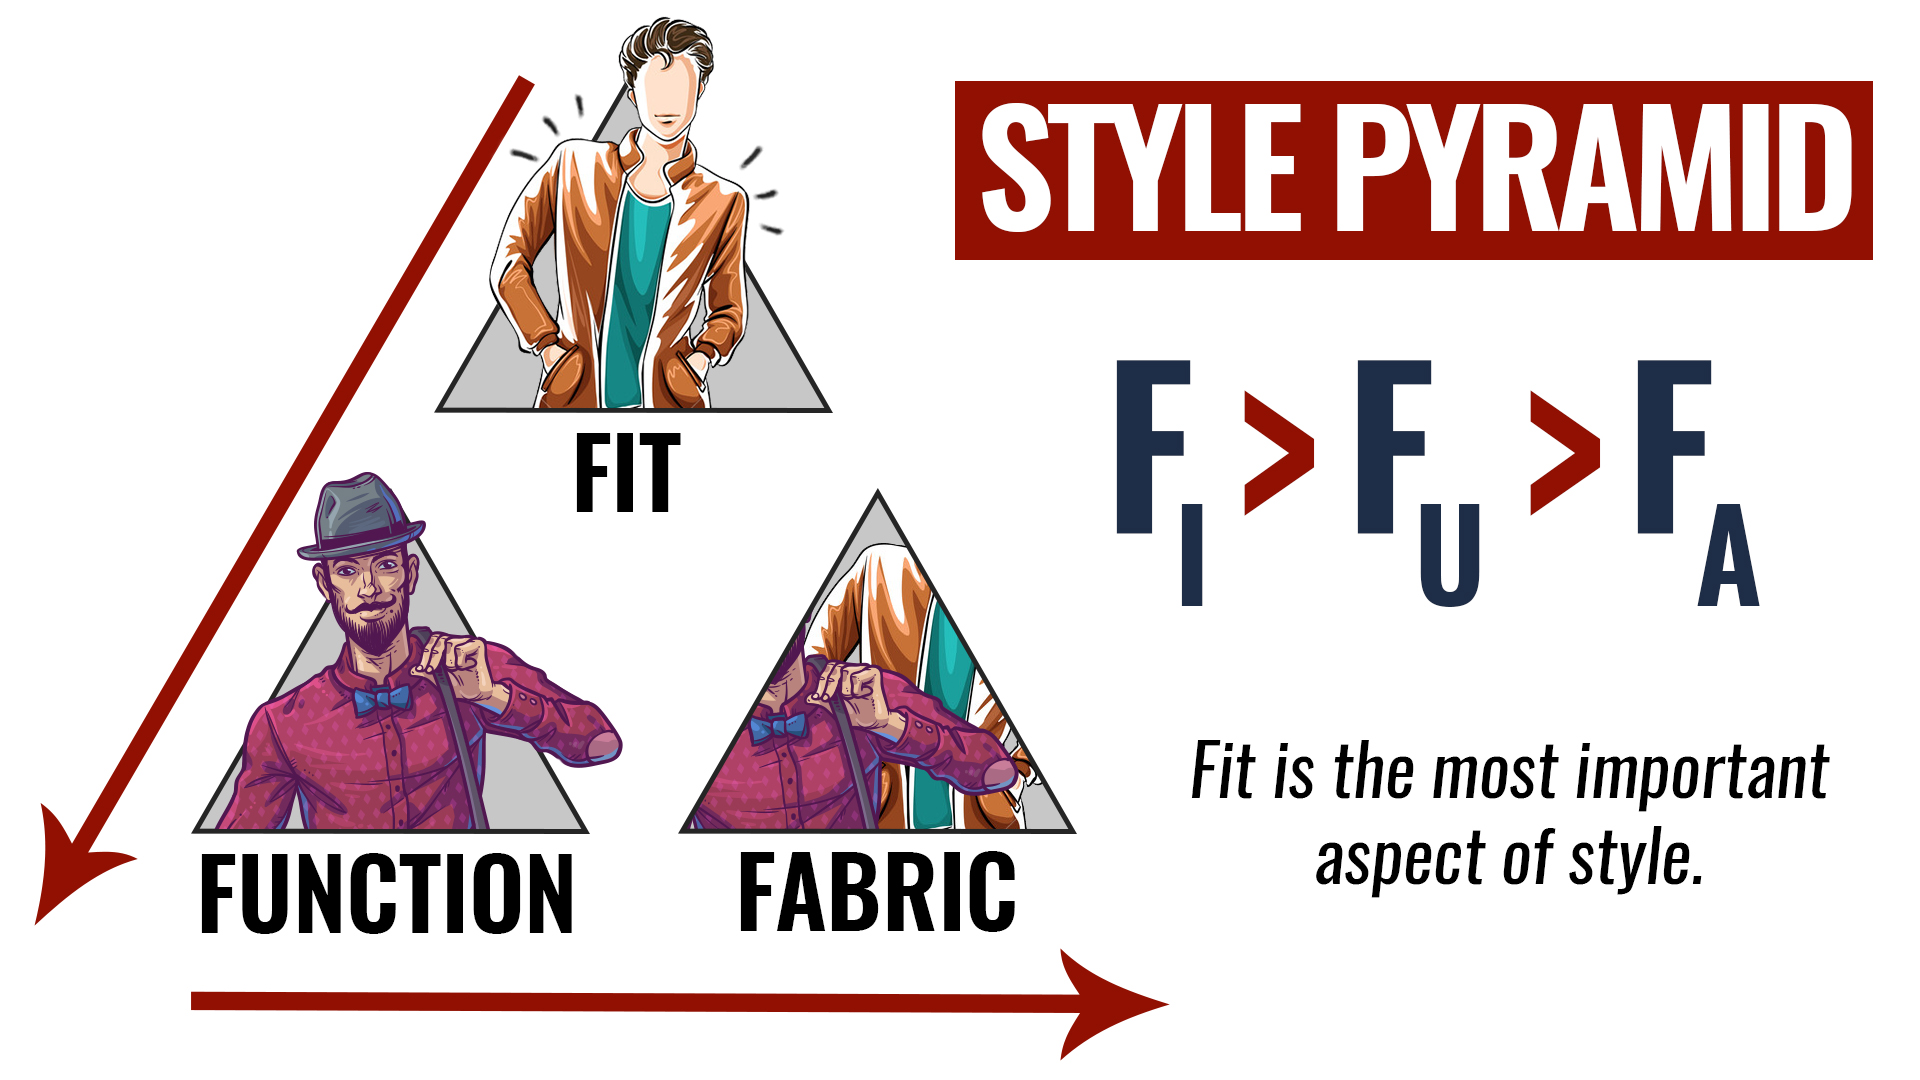 The Style Pyramid